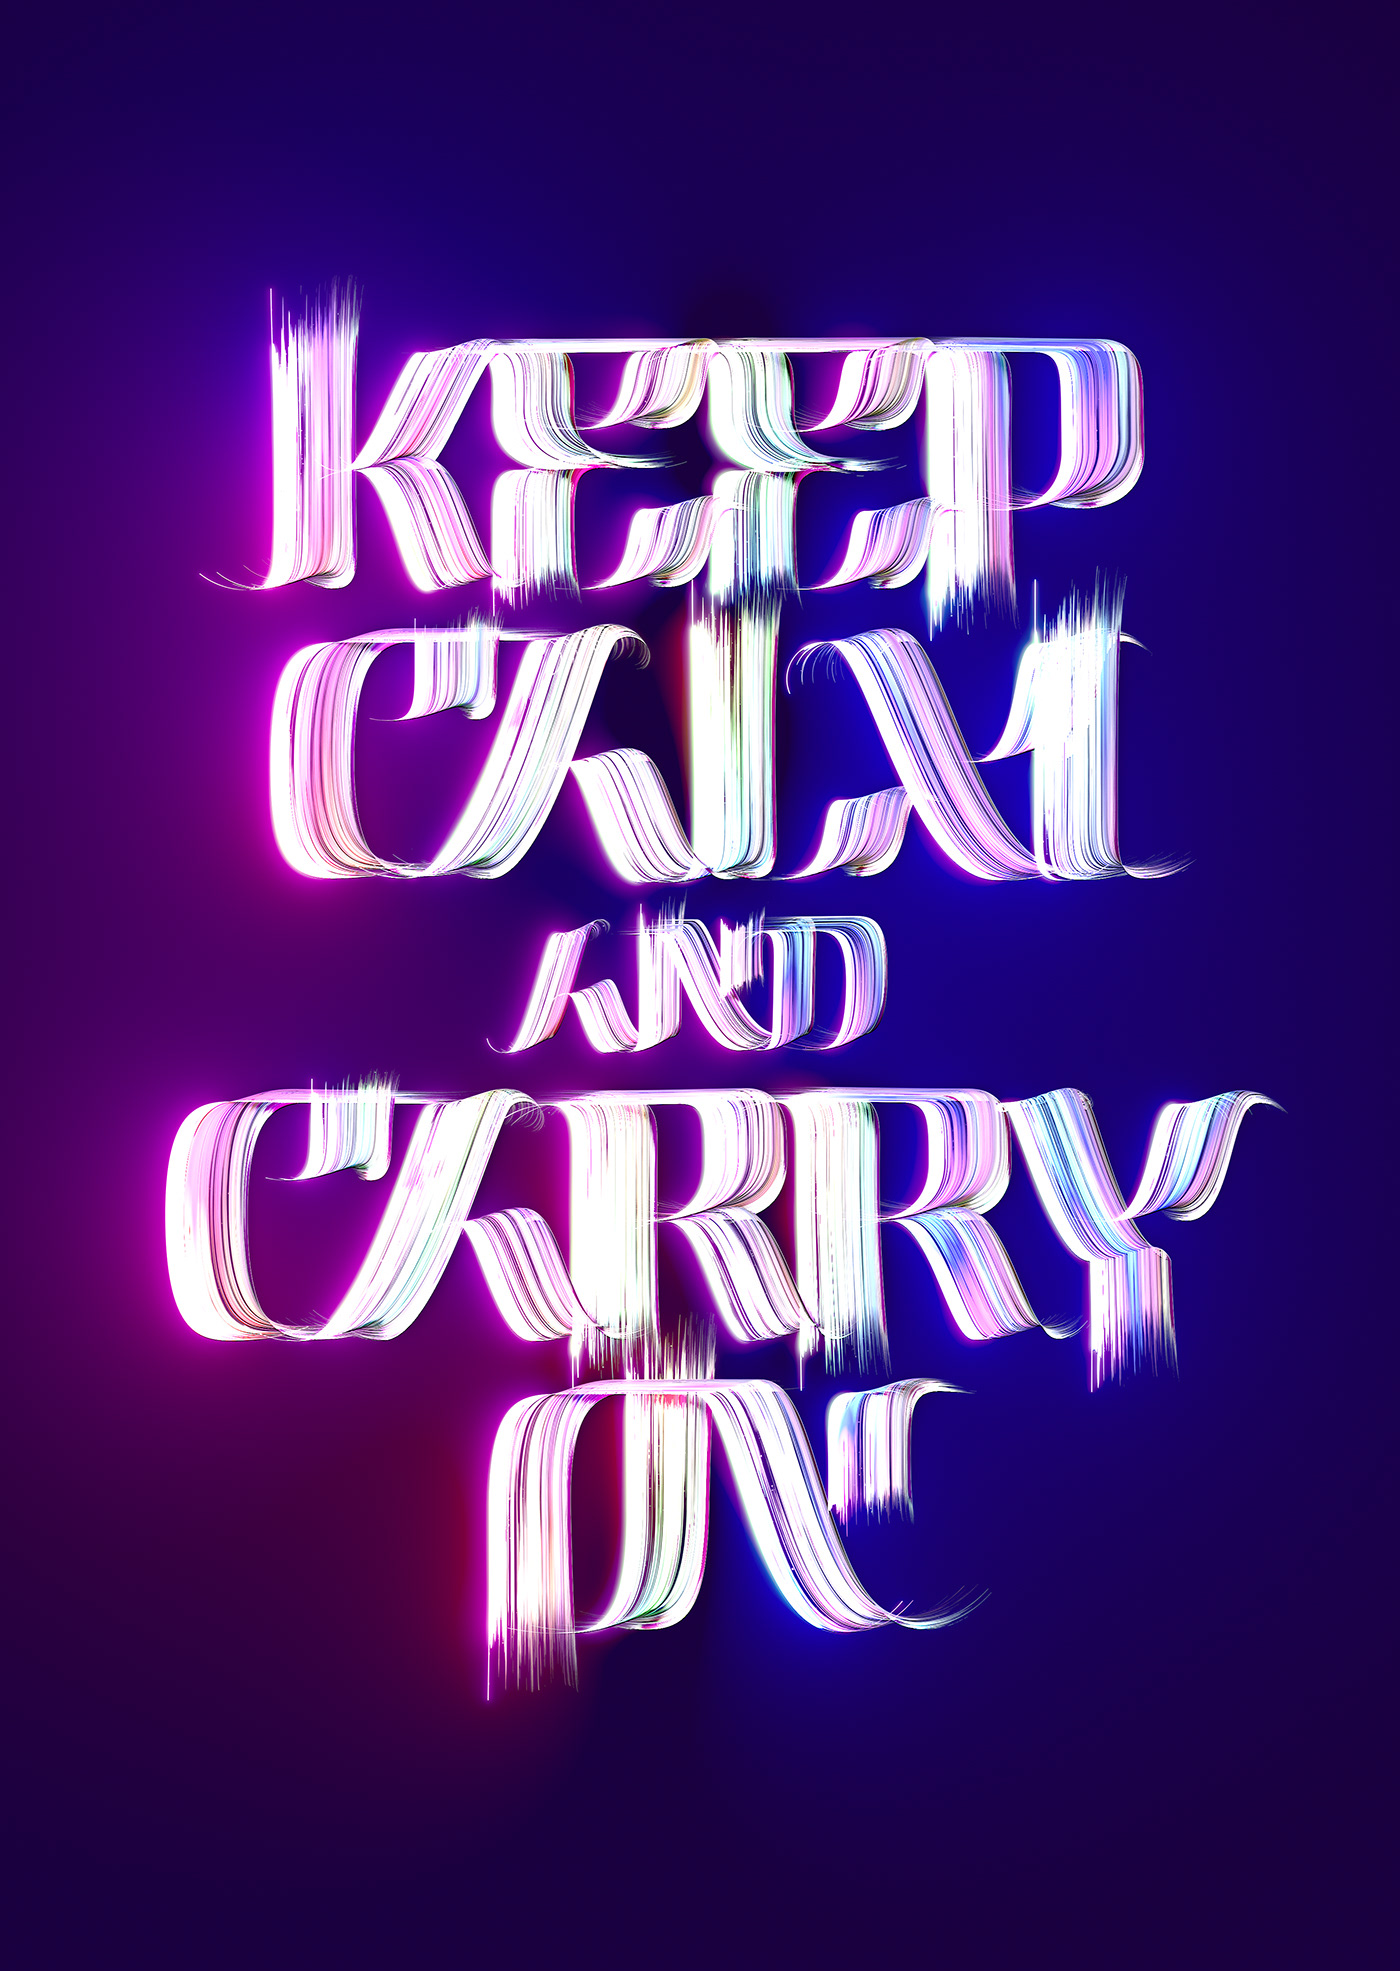 3D typography brush Calligraphy   font lettering neon poster rough typography   vivid